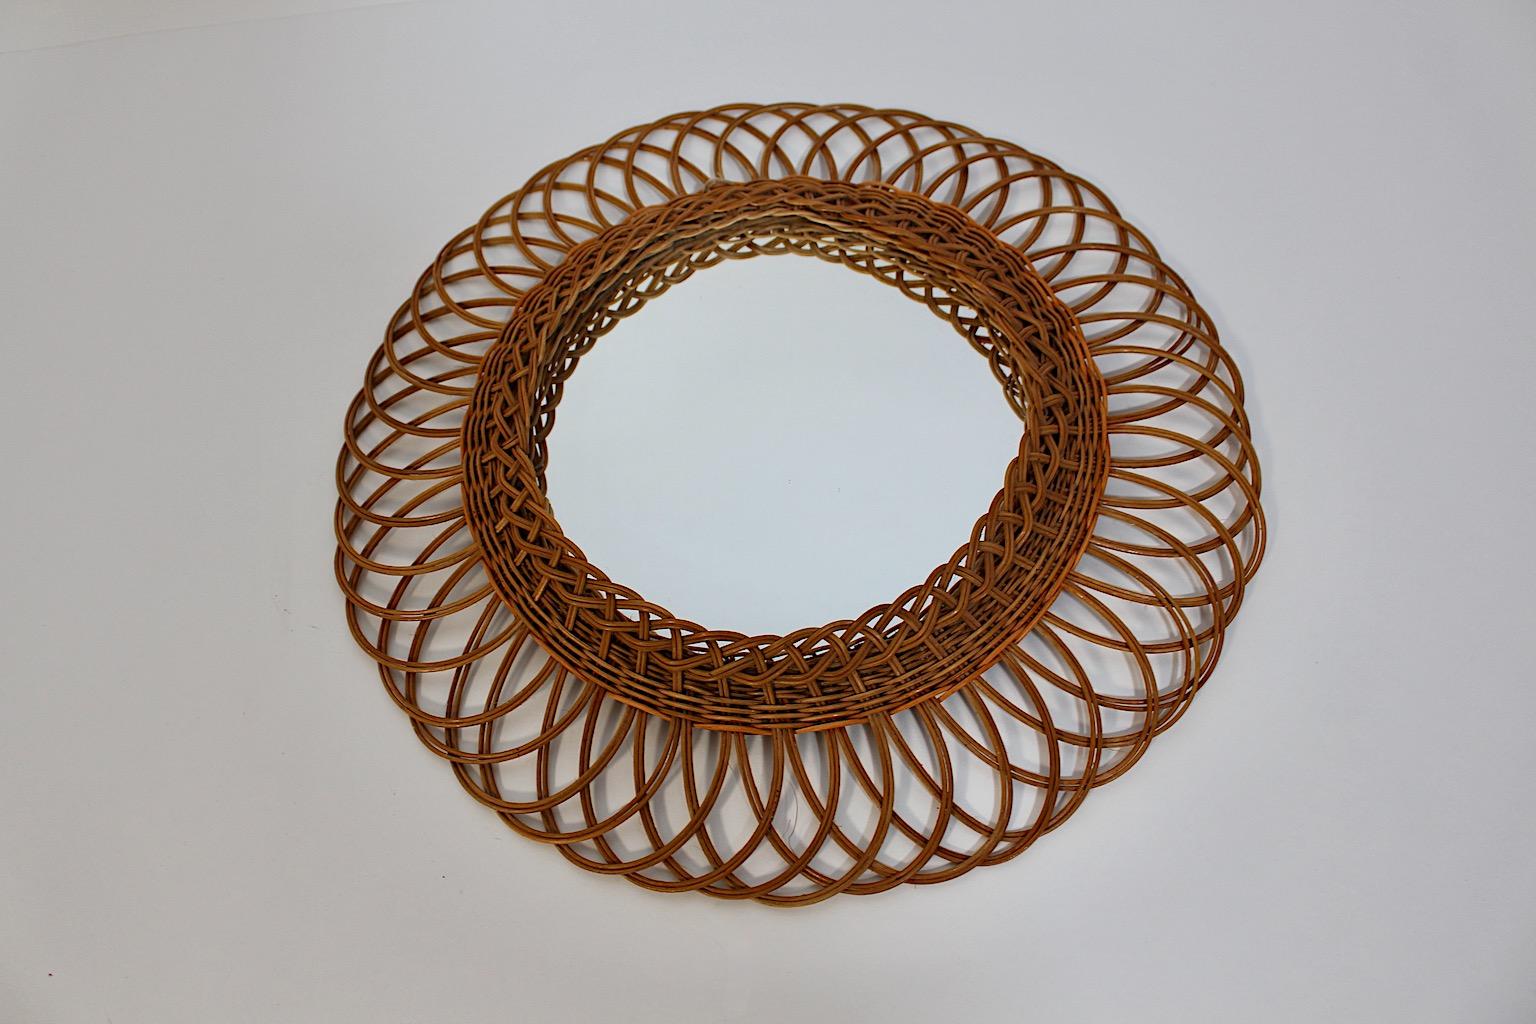 Organic Mid Century Modern Riviera Style vintage circular wall mirror or sunburst mirror from willow and mirror glass 1960s Austria.
A stunning circular like wall mirror framed with slightly curved willow sunburst like 
hand made 1960s Austria.
This